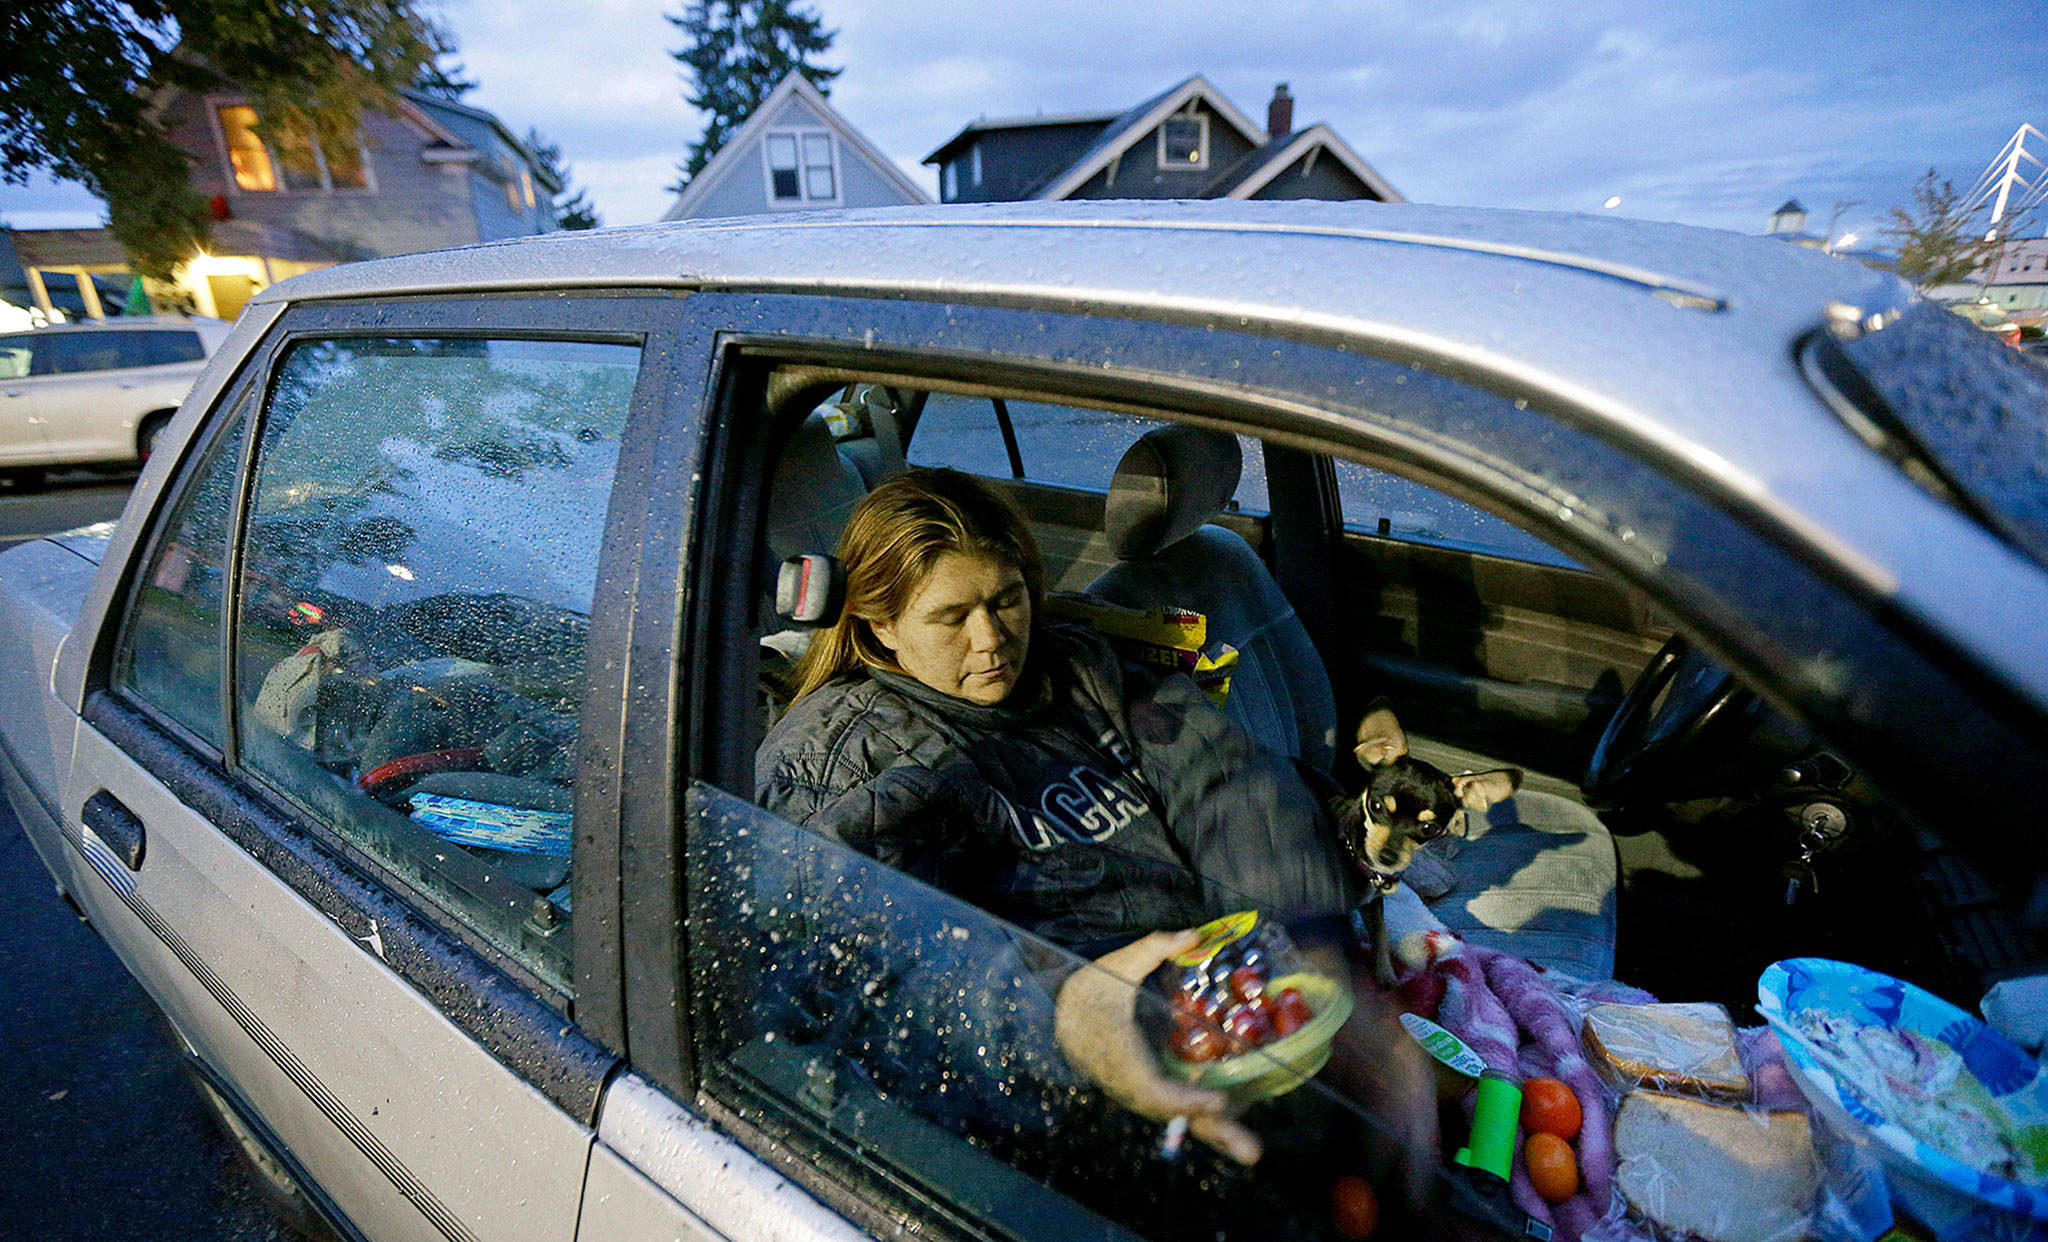 Paige Clem sits in the car she lives in with her husband and three dogs outside a church in Everett, where free food was being distributed. Clem, who said she has battled drug addiction in the past but was now clean, said having enough money just to run the heat in her car and move it when required was a daily challenge. (AP Photo/Ted S. Warren)